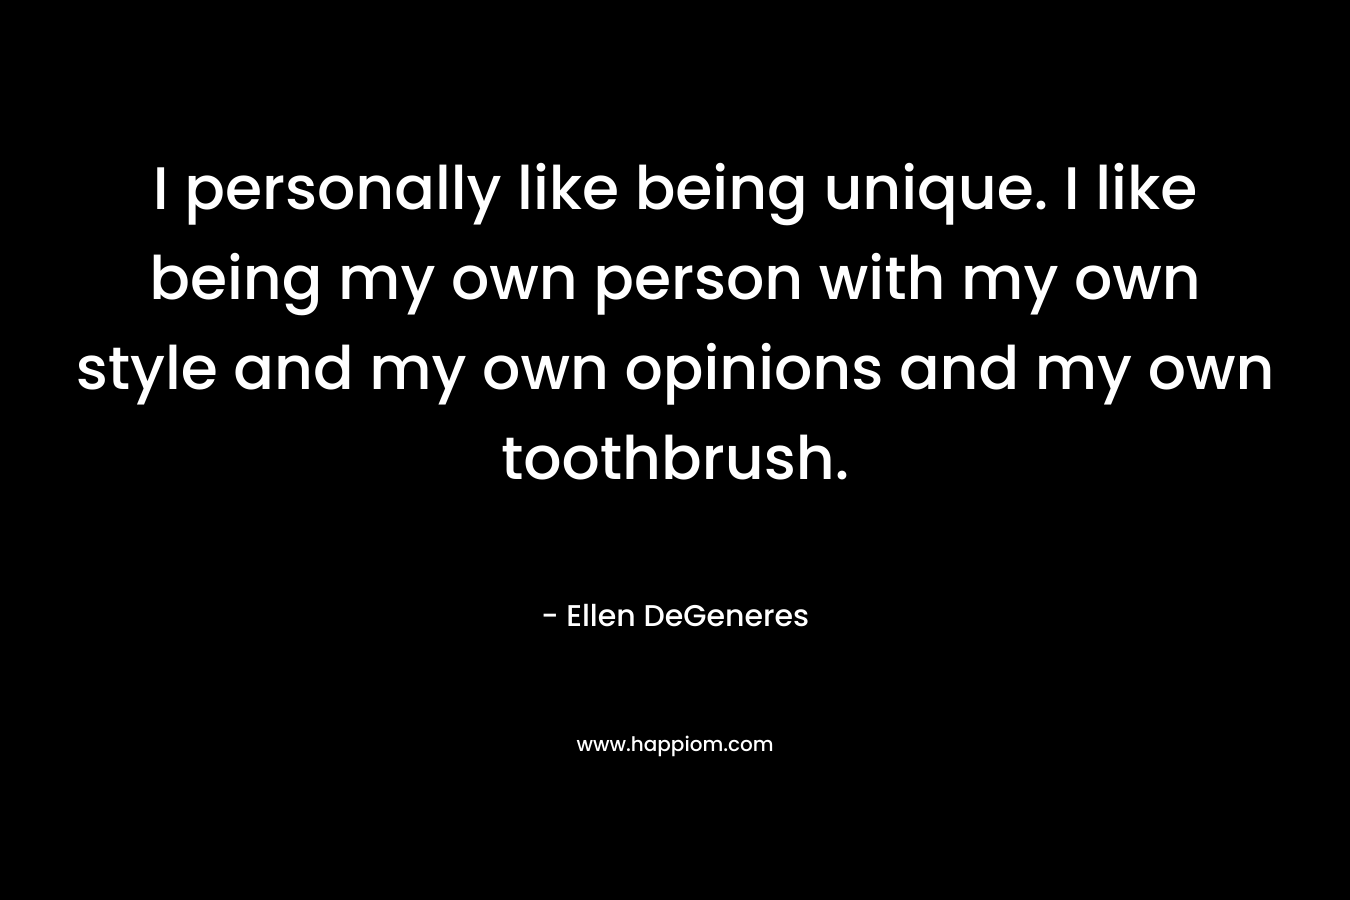 I personally like being unique. I like being my own person with my own style and my own opinions and my own toothbrush. – Ellen DeGeneres